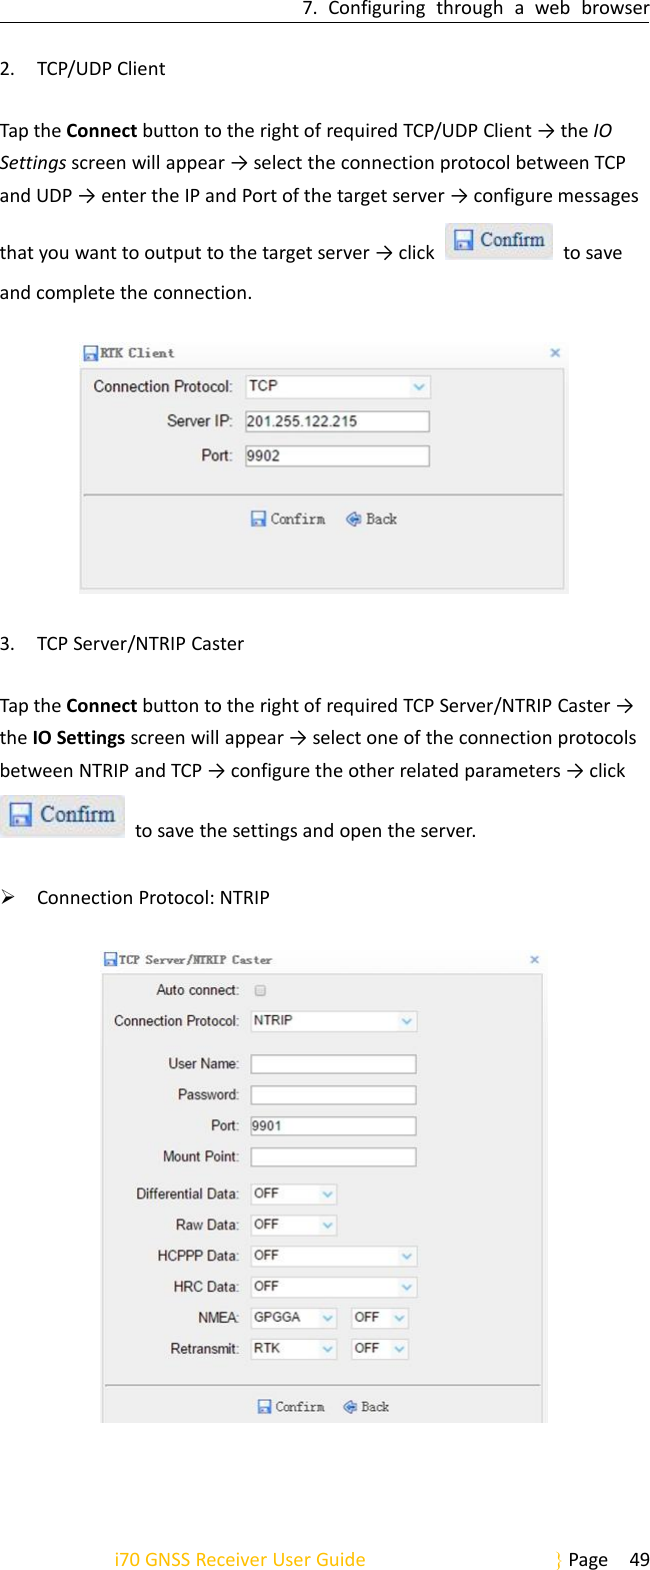 7. Configuring through a web browseri70 GNSS Receiver User Guide Page 492. TCP/UDP ClientTap the Connect button to the right of required TCP/UDP Client → the IOSettings screen will appear → select the connection protocol between TCPand UDP → enter the IP and Port of the target server → configure messagesthat you want to output to the target server → click to saveand complete the connection.3. TCP Server/NTRIP CasterTap the Connect button to the right of required TCP Server/NTRIP Caster →the IO Settings screen will appear → select one of the connection protocolsbetween NTRIP and TCP → configure the other related parameters → clickto save the settings and open the server.Connection Protocol: NTRIP